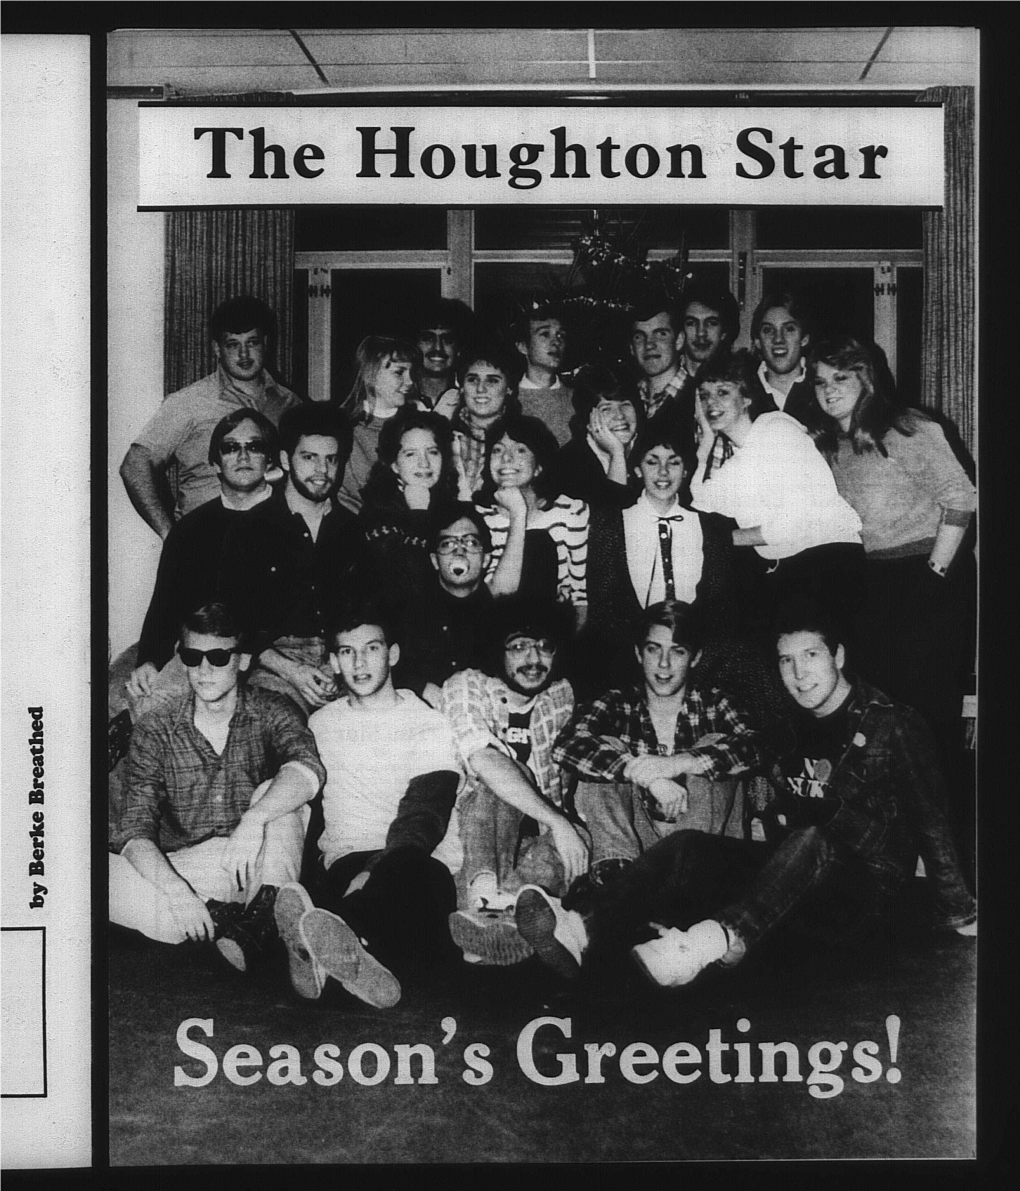 The Houghton Star